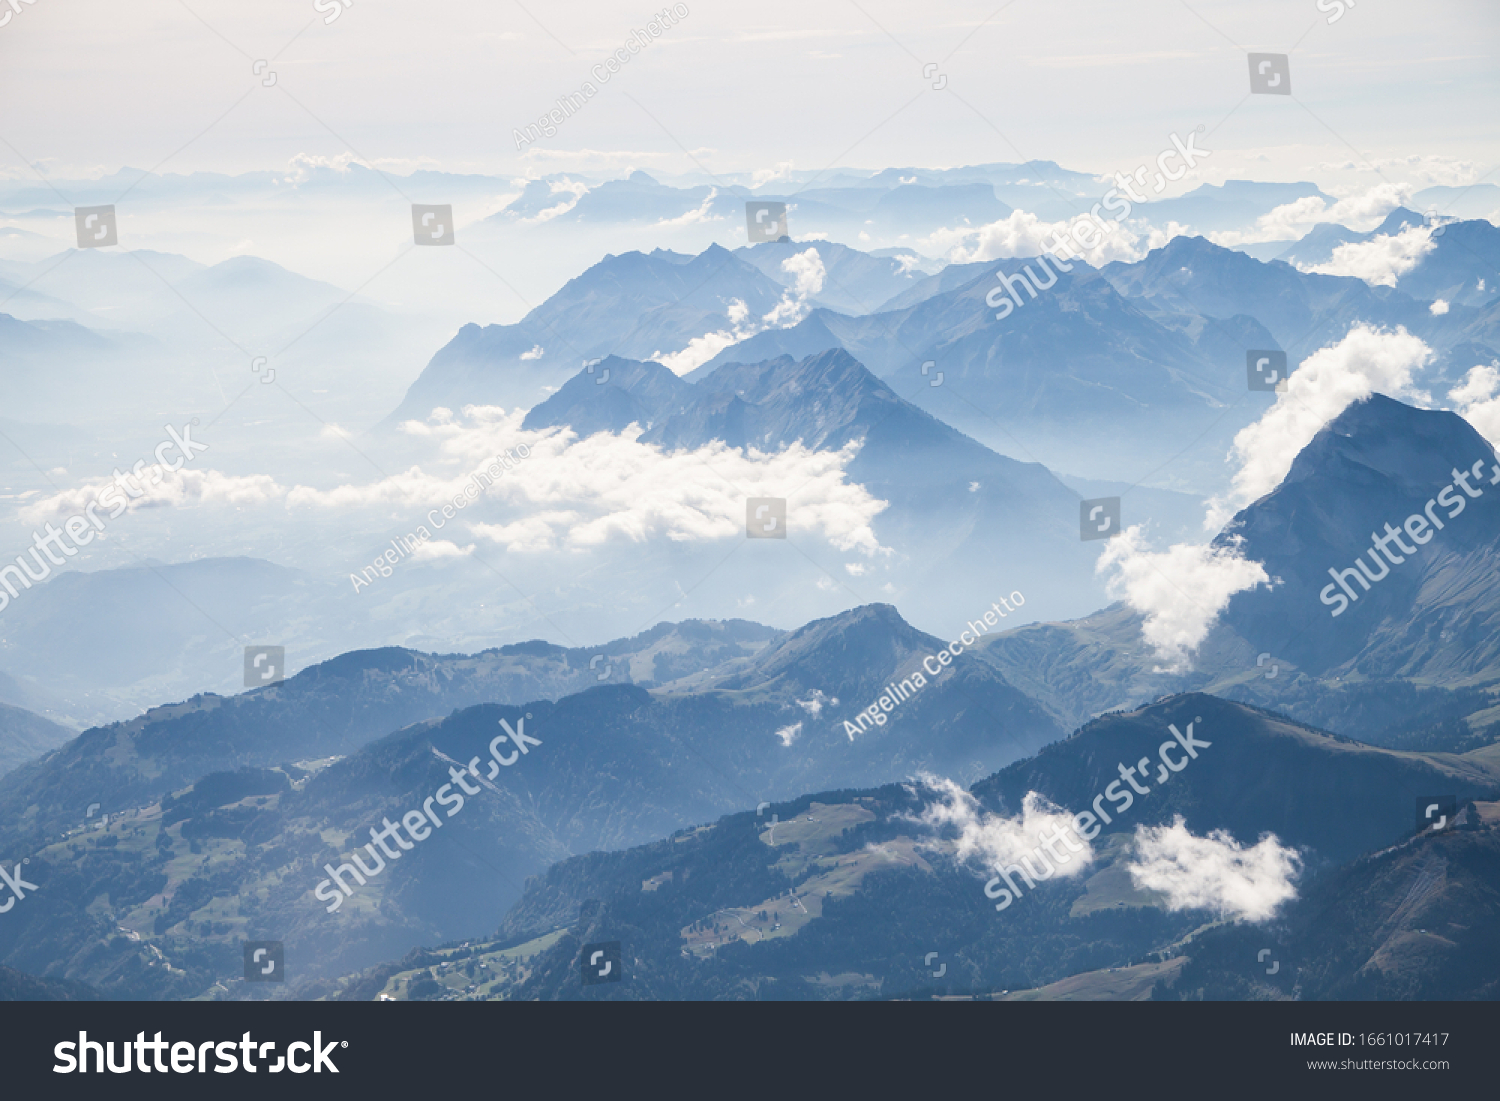 Altitude View over the Alps Moutains Chain from a Twoseater Plane #1661017417